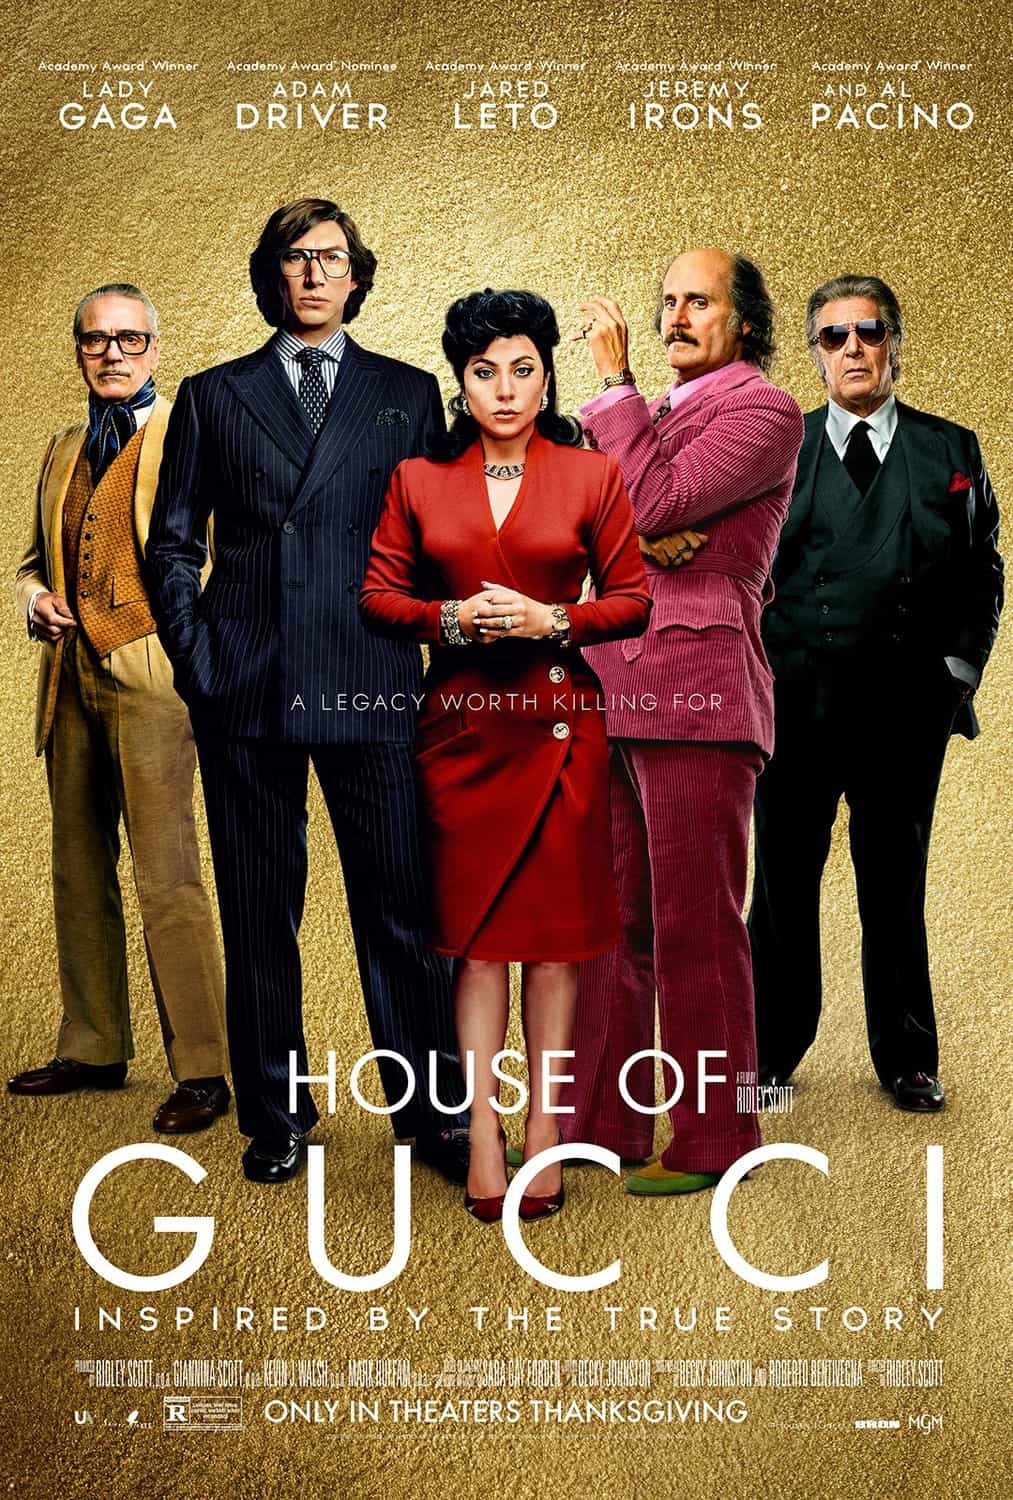 UK new movie preview weekend Friday, 26th November 2021 - House of Gucci, Encanto, A Boy Called Christmas and Pirates